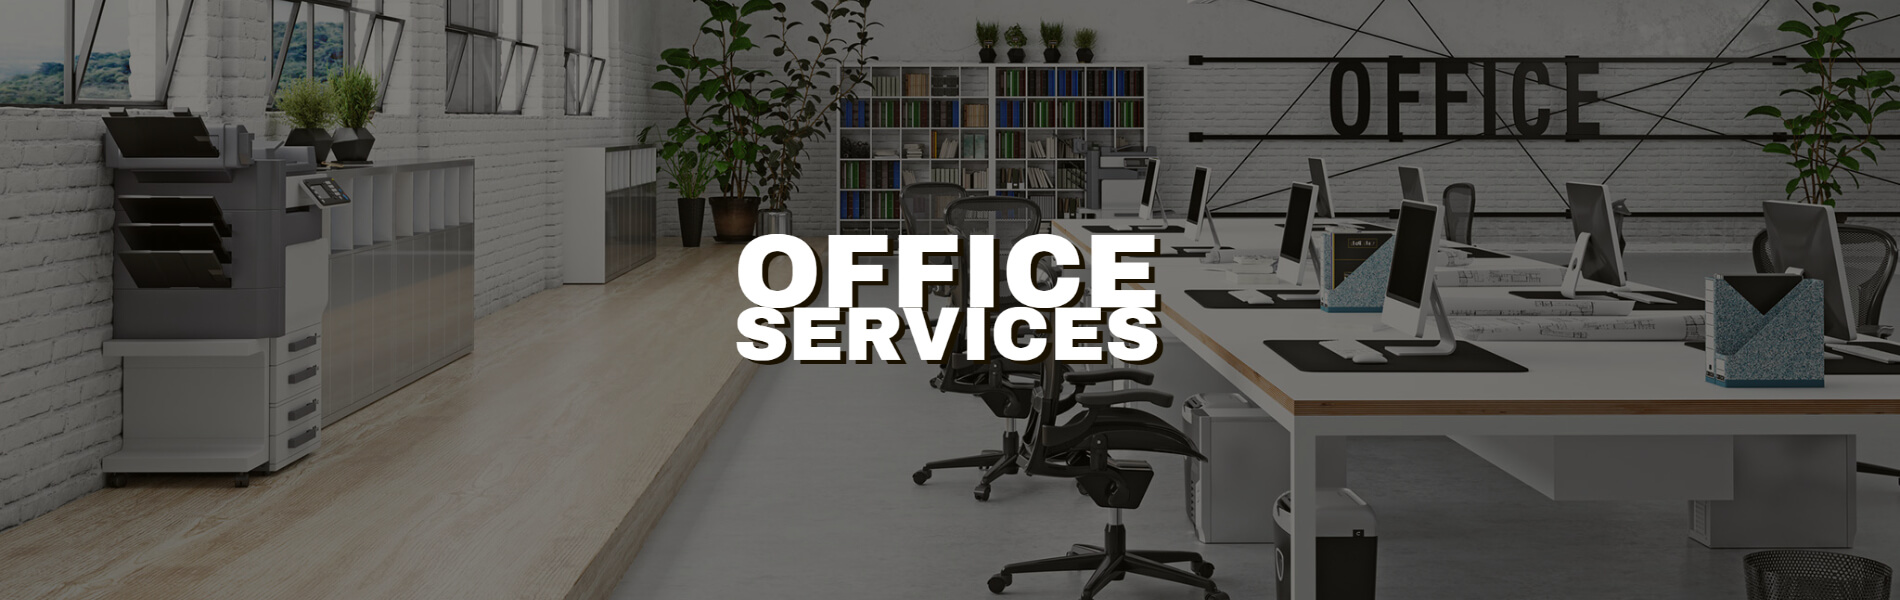 Office Services offered by Office Tech, Inc. in Denver CO